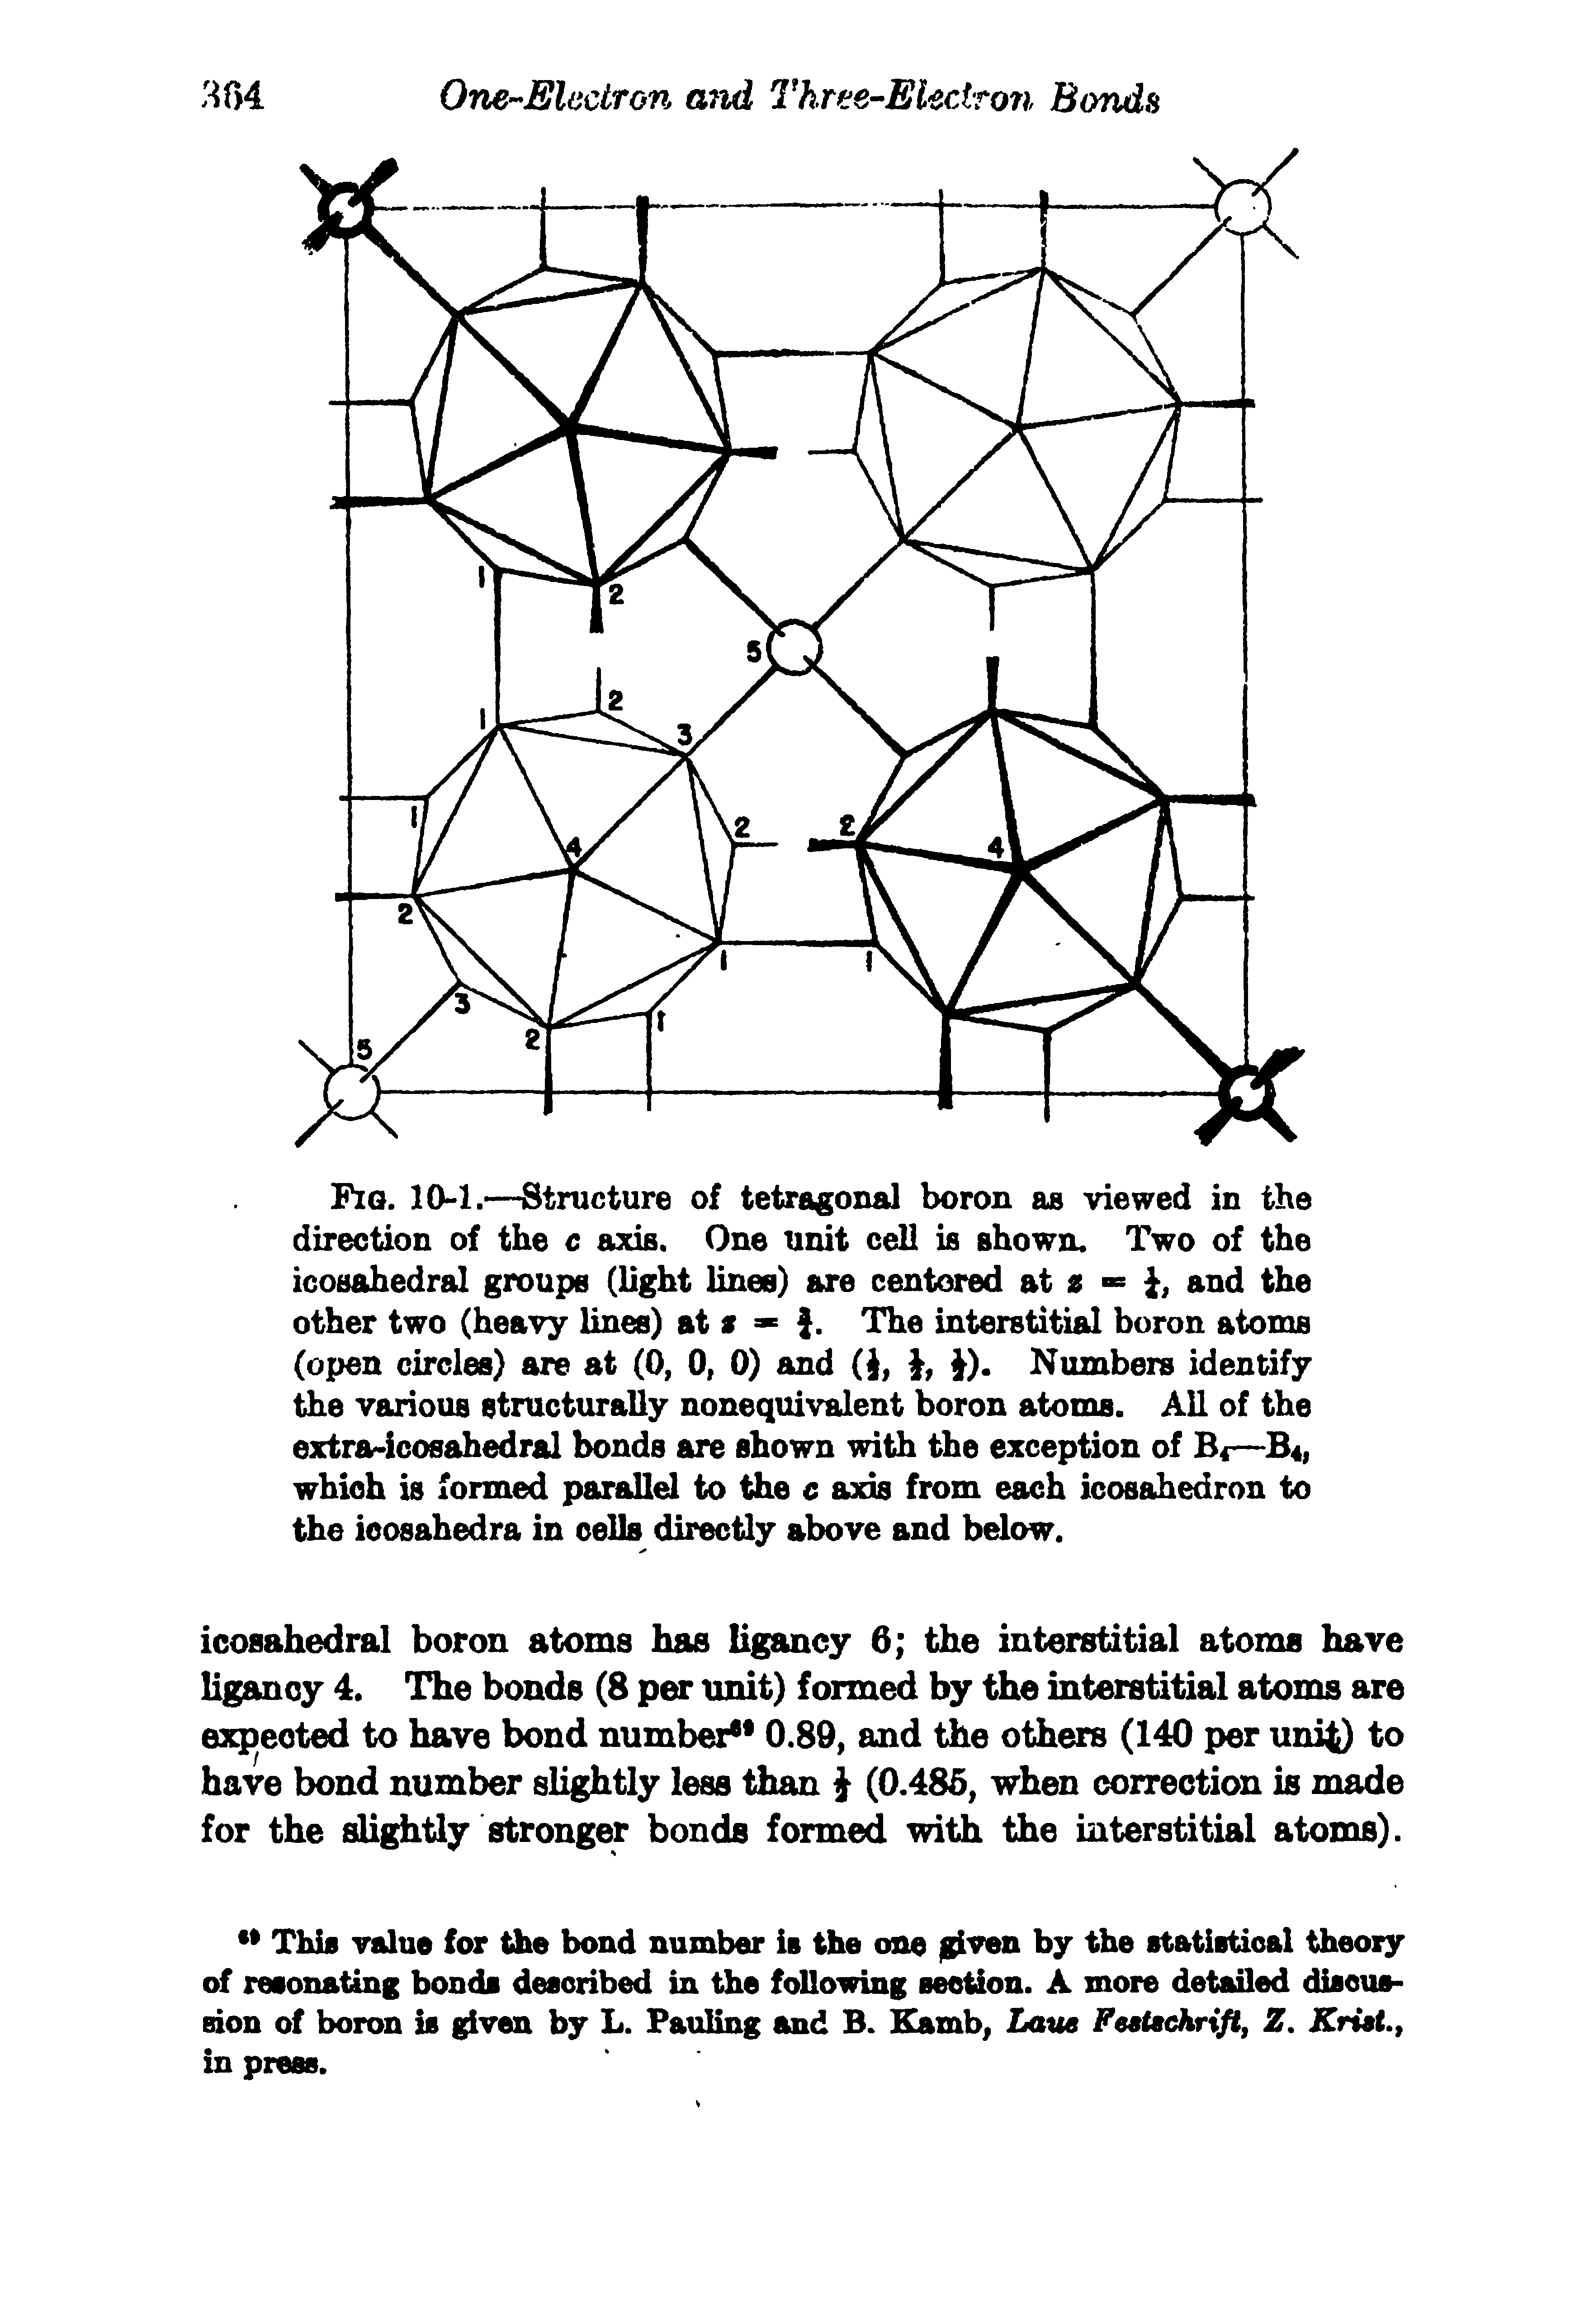 Fig. 10-1.—Structure of tetragonal boron as viewed in the direction of the c axis. One unit cell is shown. Two of the icosahedral groups (light lines) are centered at z , and the other two (heavy lines) at. The interstitial boron atoms (open circles) are at (0, 0, 0) and (j, ). Numbers identify...